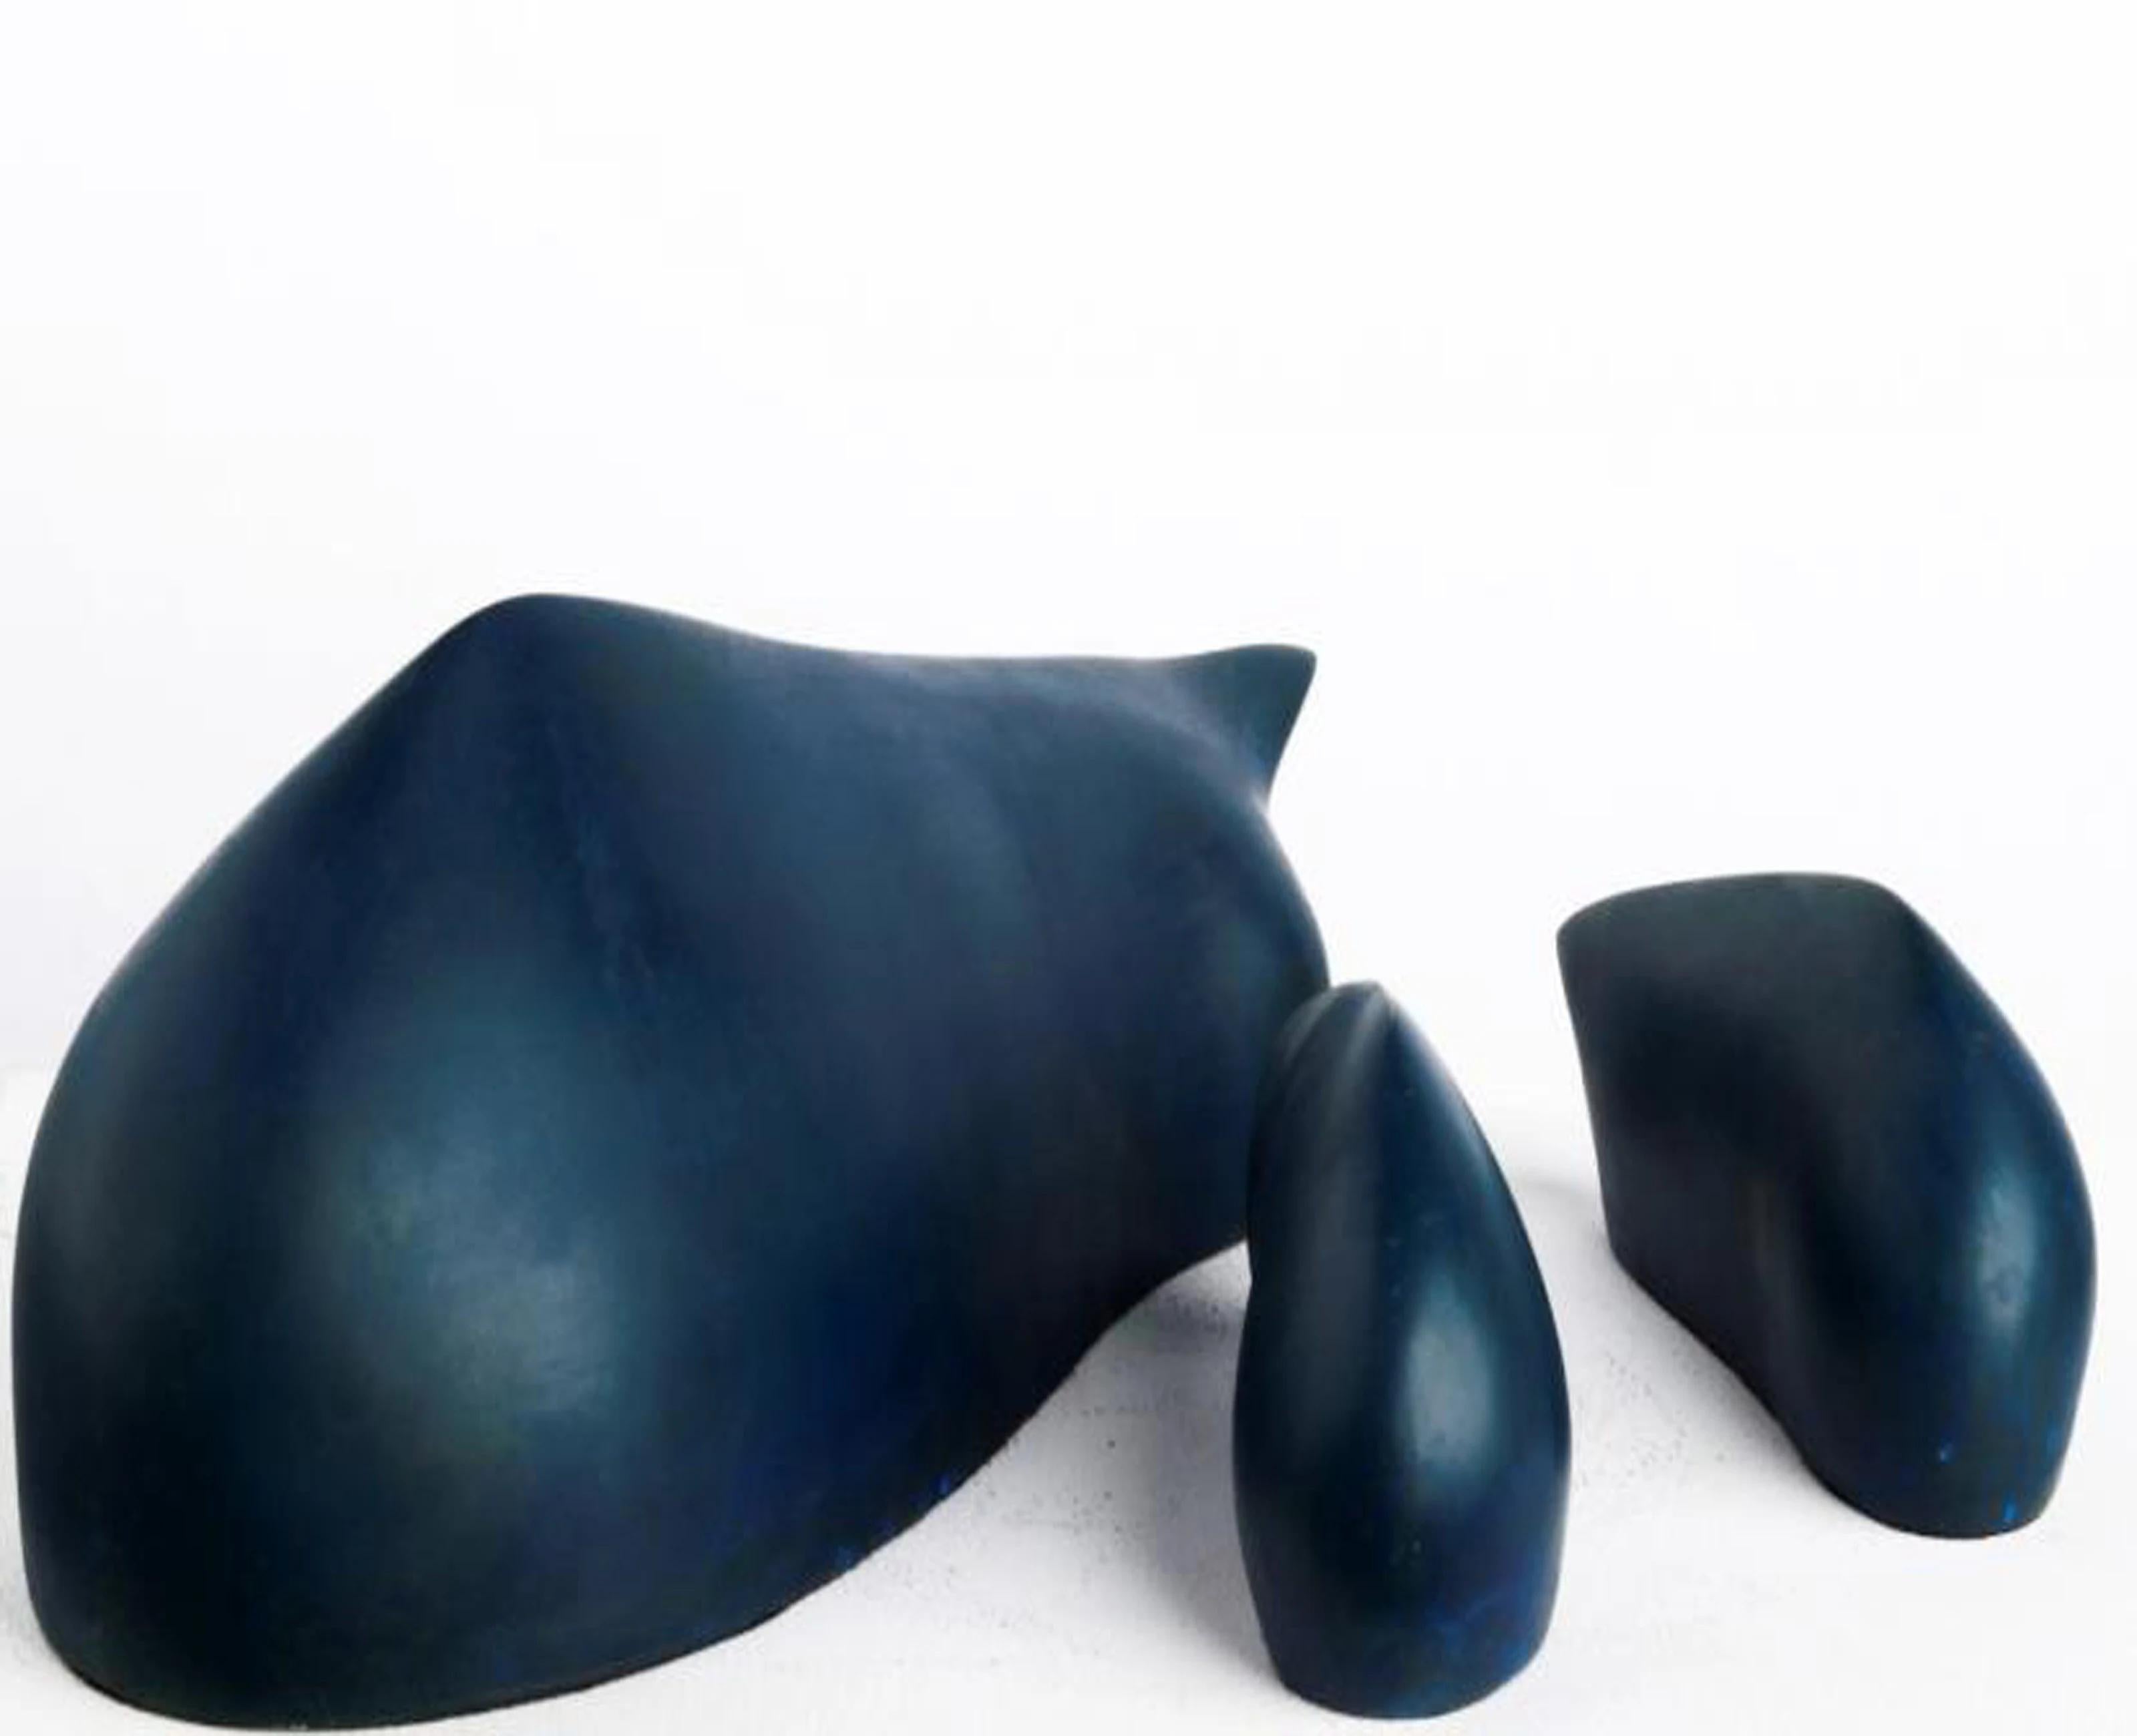 "Family of Whales" Abstract Bronze Sculpture (3 Pieces) by Eman Barakat

3 pieces: 
5" x 13" x 6" inch

Eman Barakat is an Egyptian Postwar & Contemporary artist who was born in 1988. Their work was featured in several exhibitions at key galleries